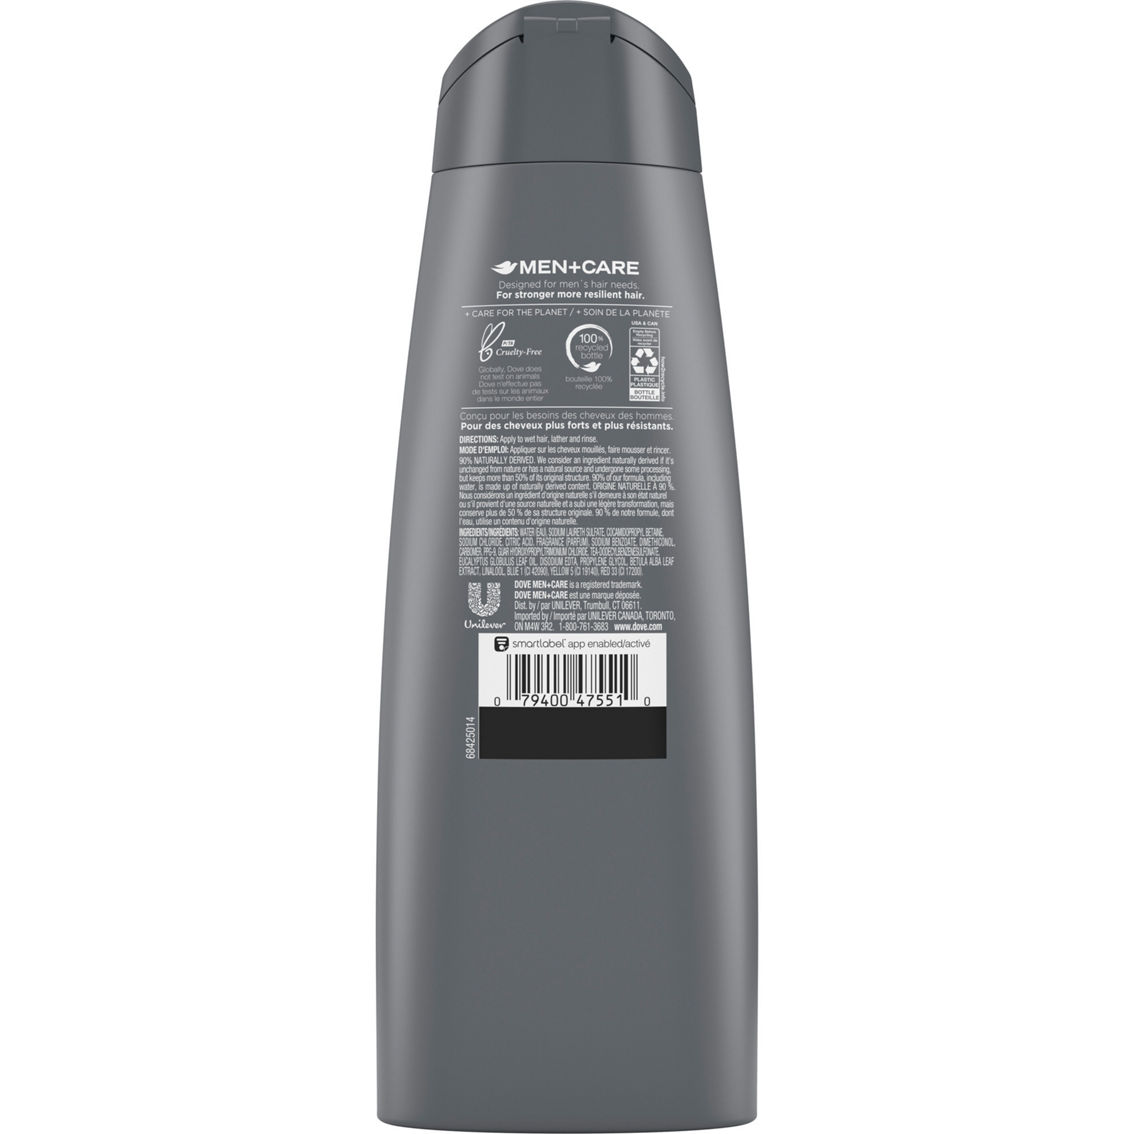 Dove Men+Care 2 in 1 Eucalyptus and Birch Shampoo and Conditioner 12 oz. - Image 2 of 2